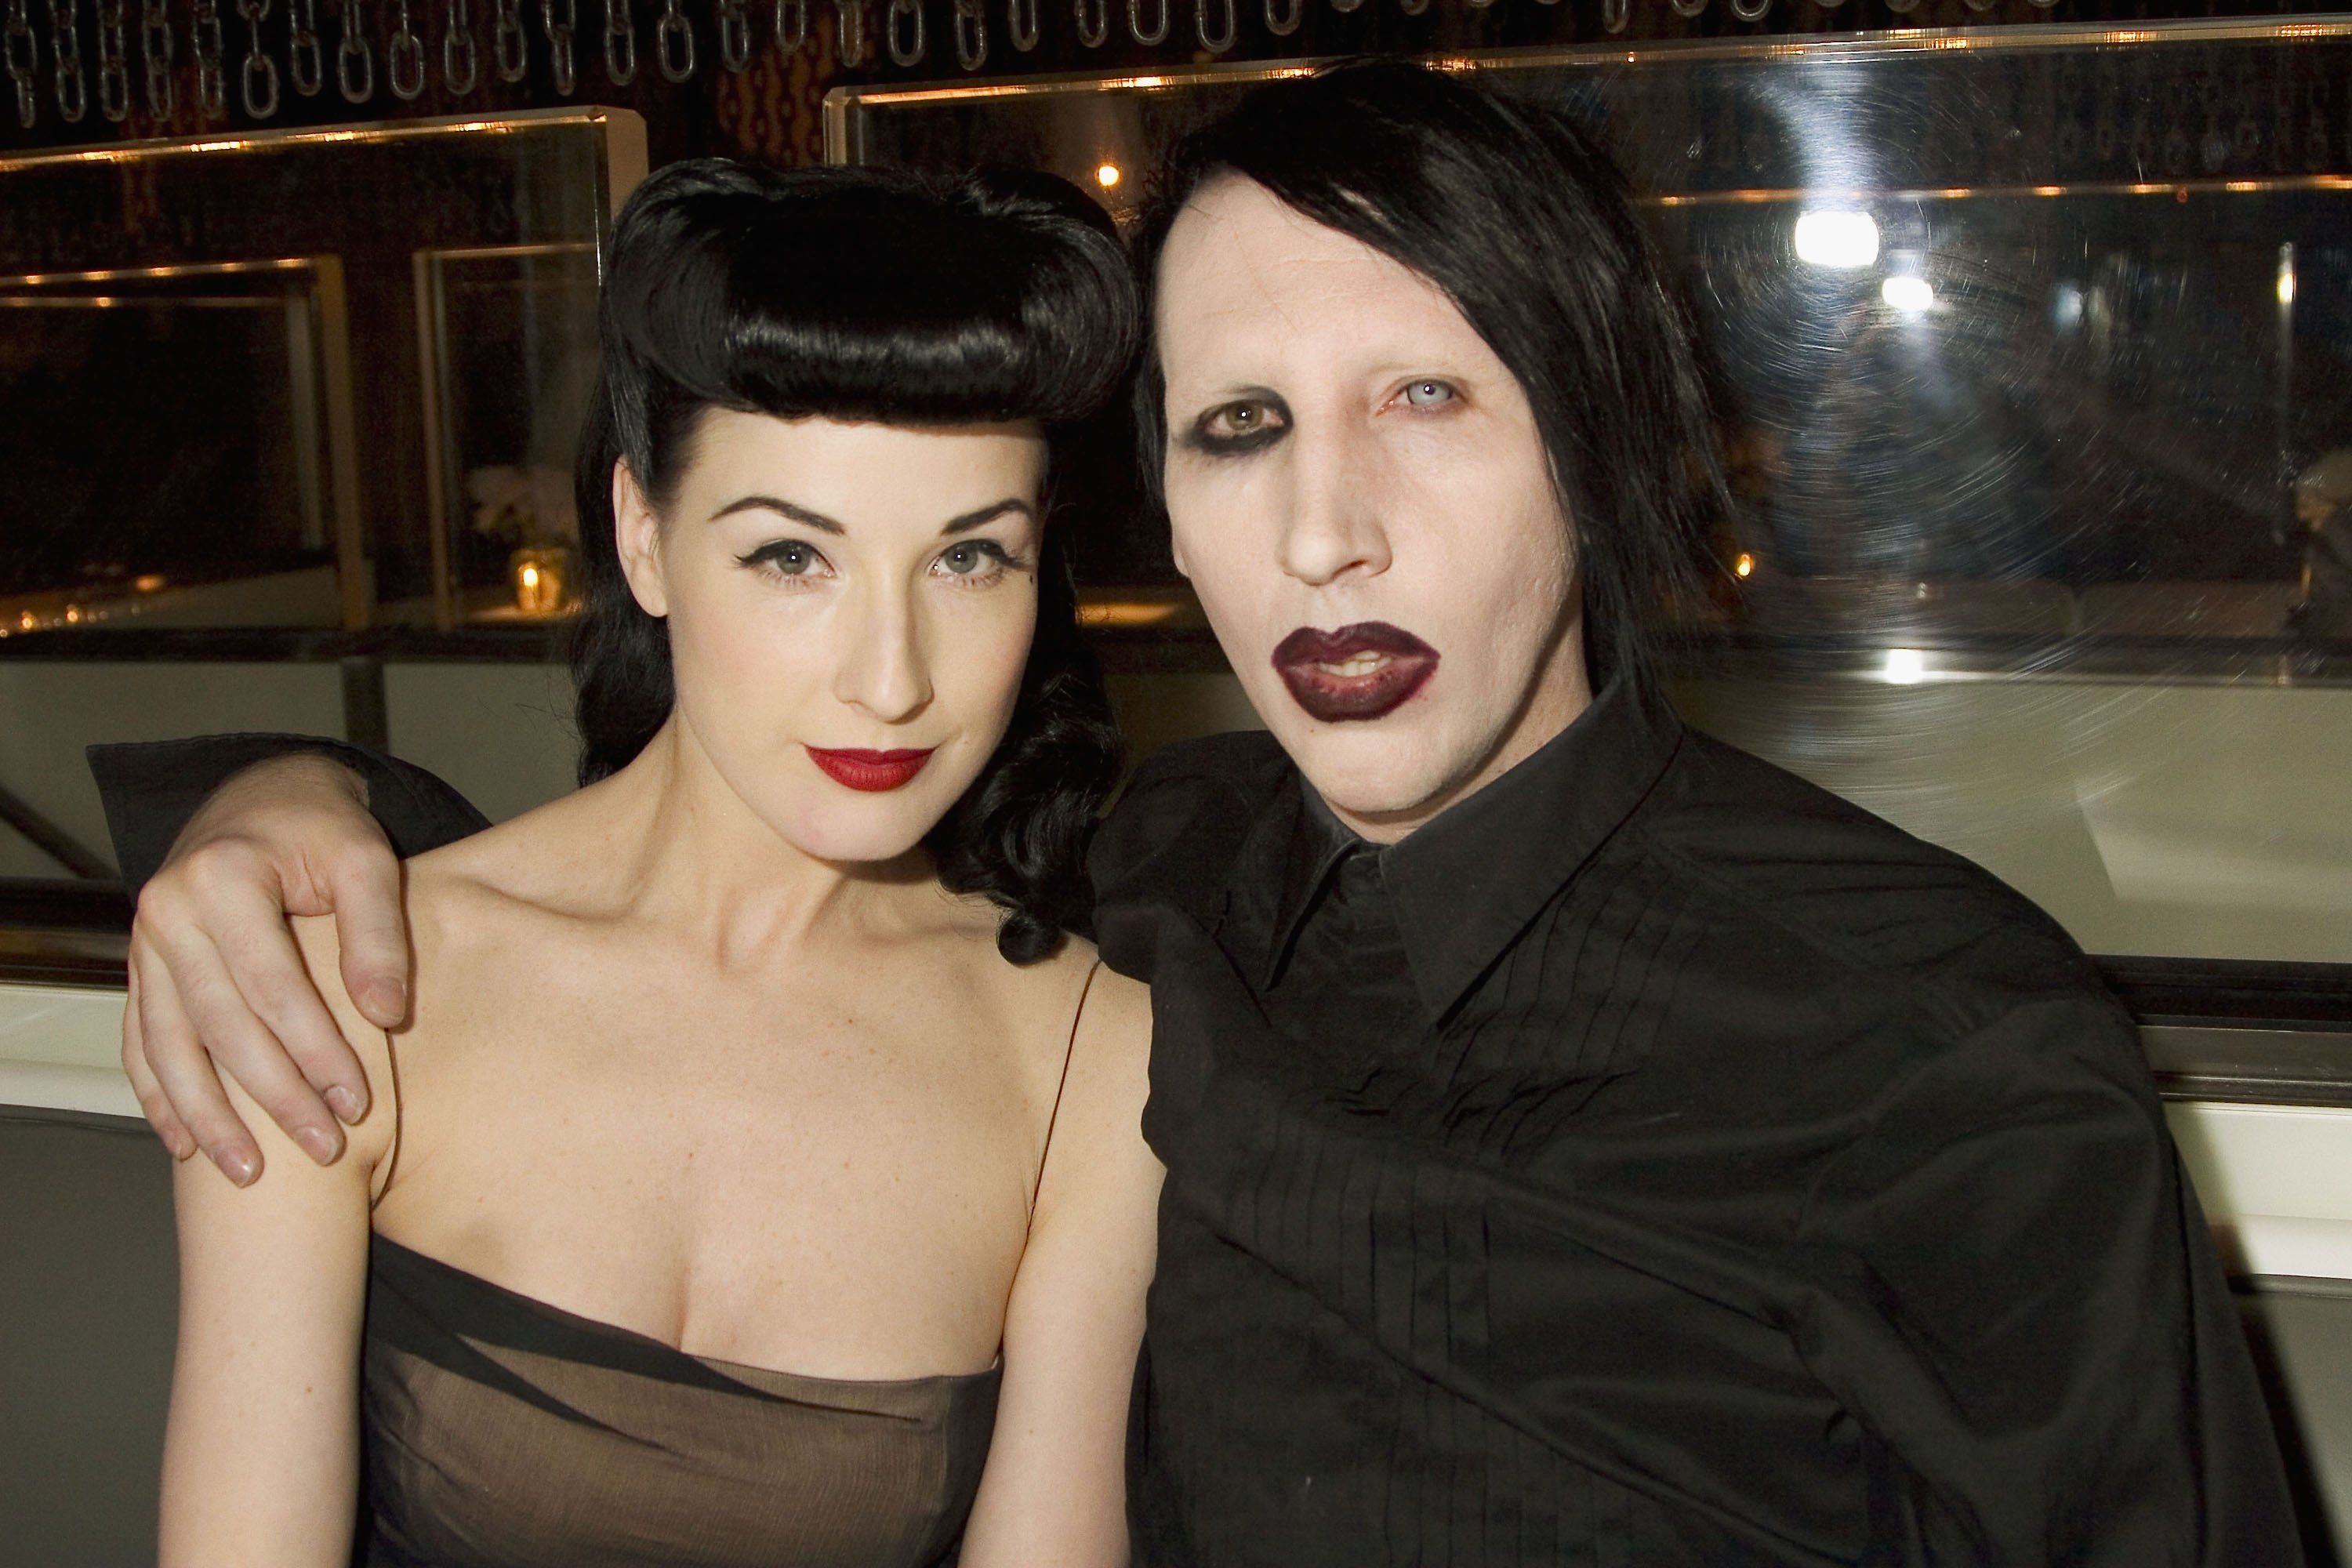 Dita Von Teese and Marilyn Manson atthe opening of MR CHOW Tribeca on May 4, 2006 in New York. | Photo: Getty Images